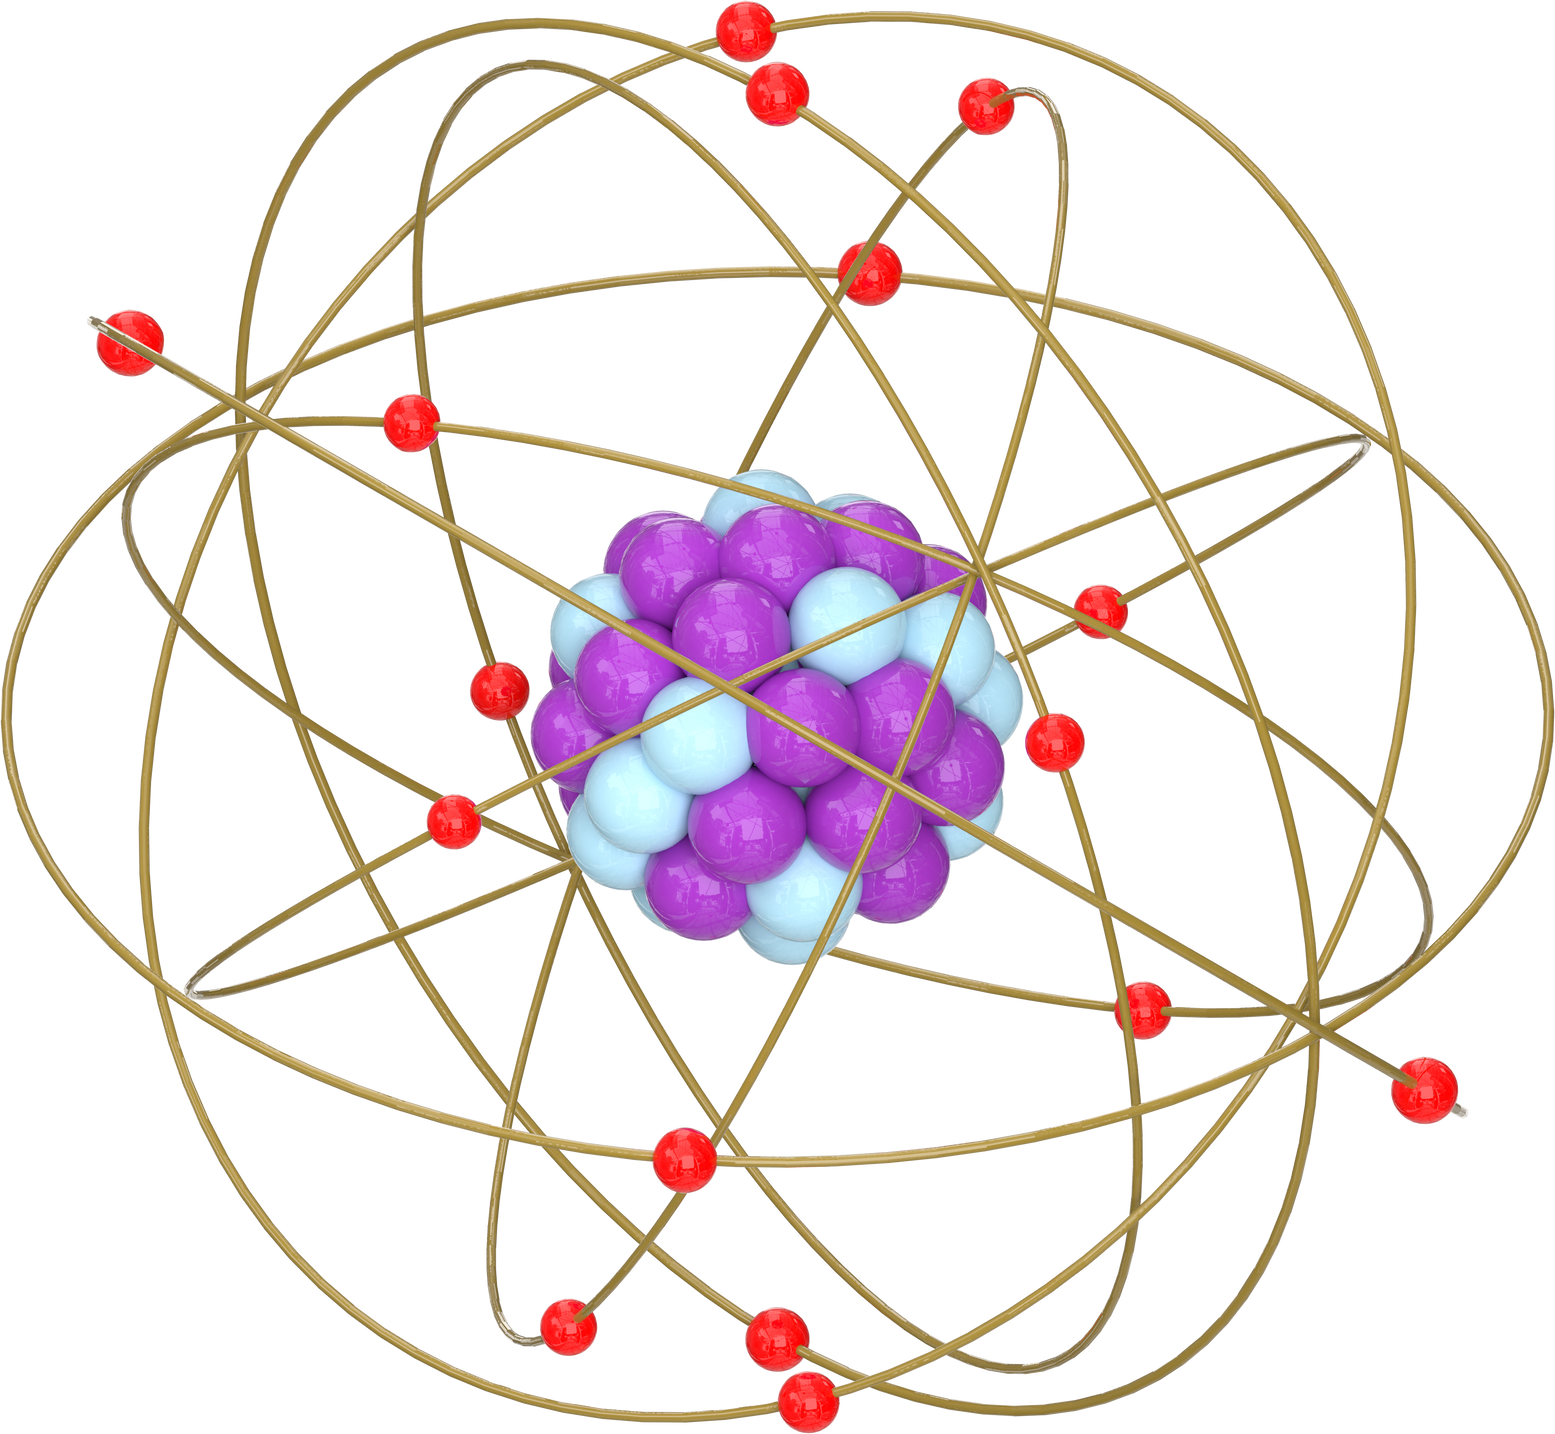 3D rendering illustration of a stylized atom